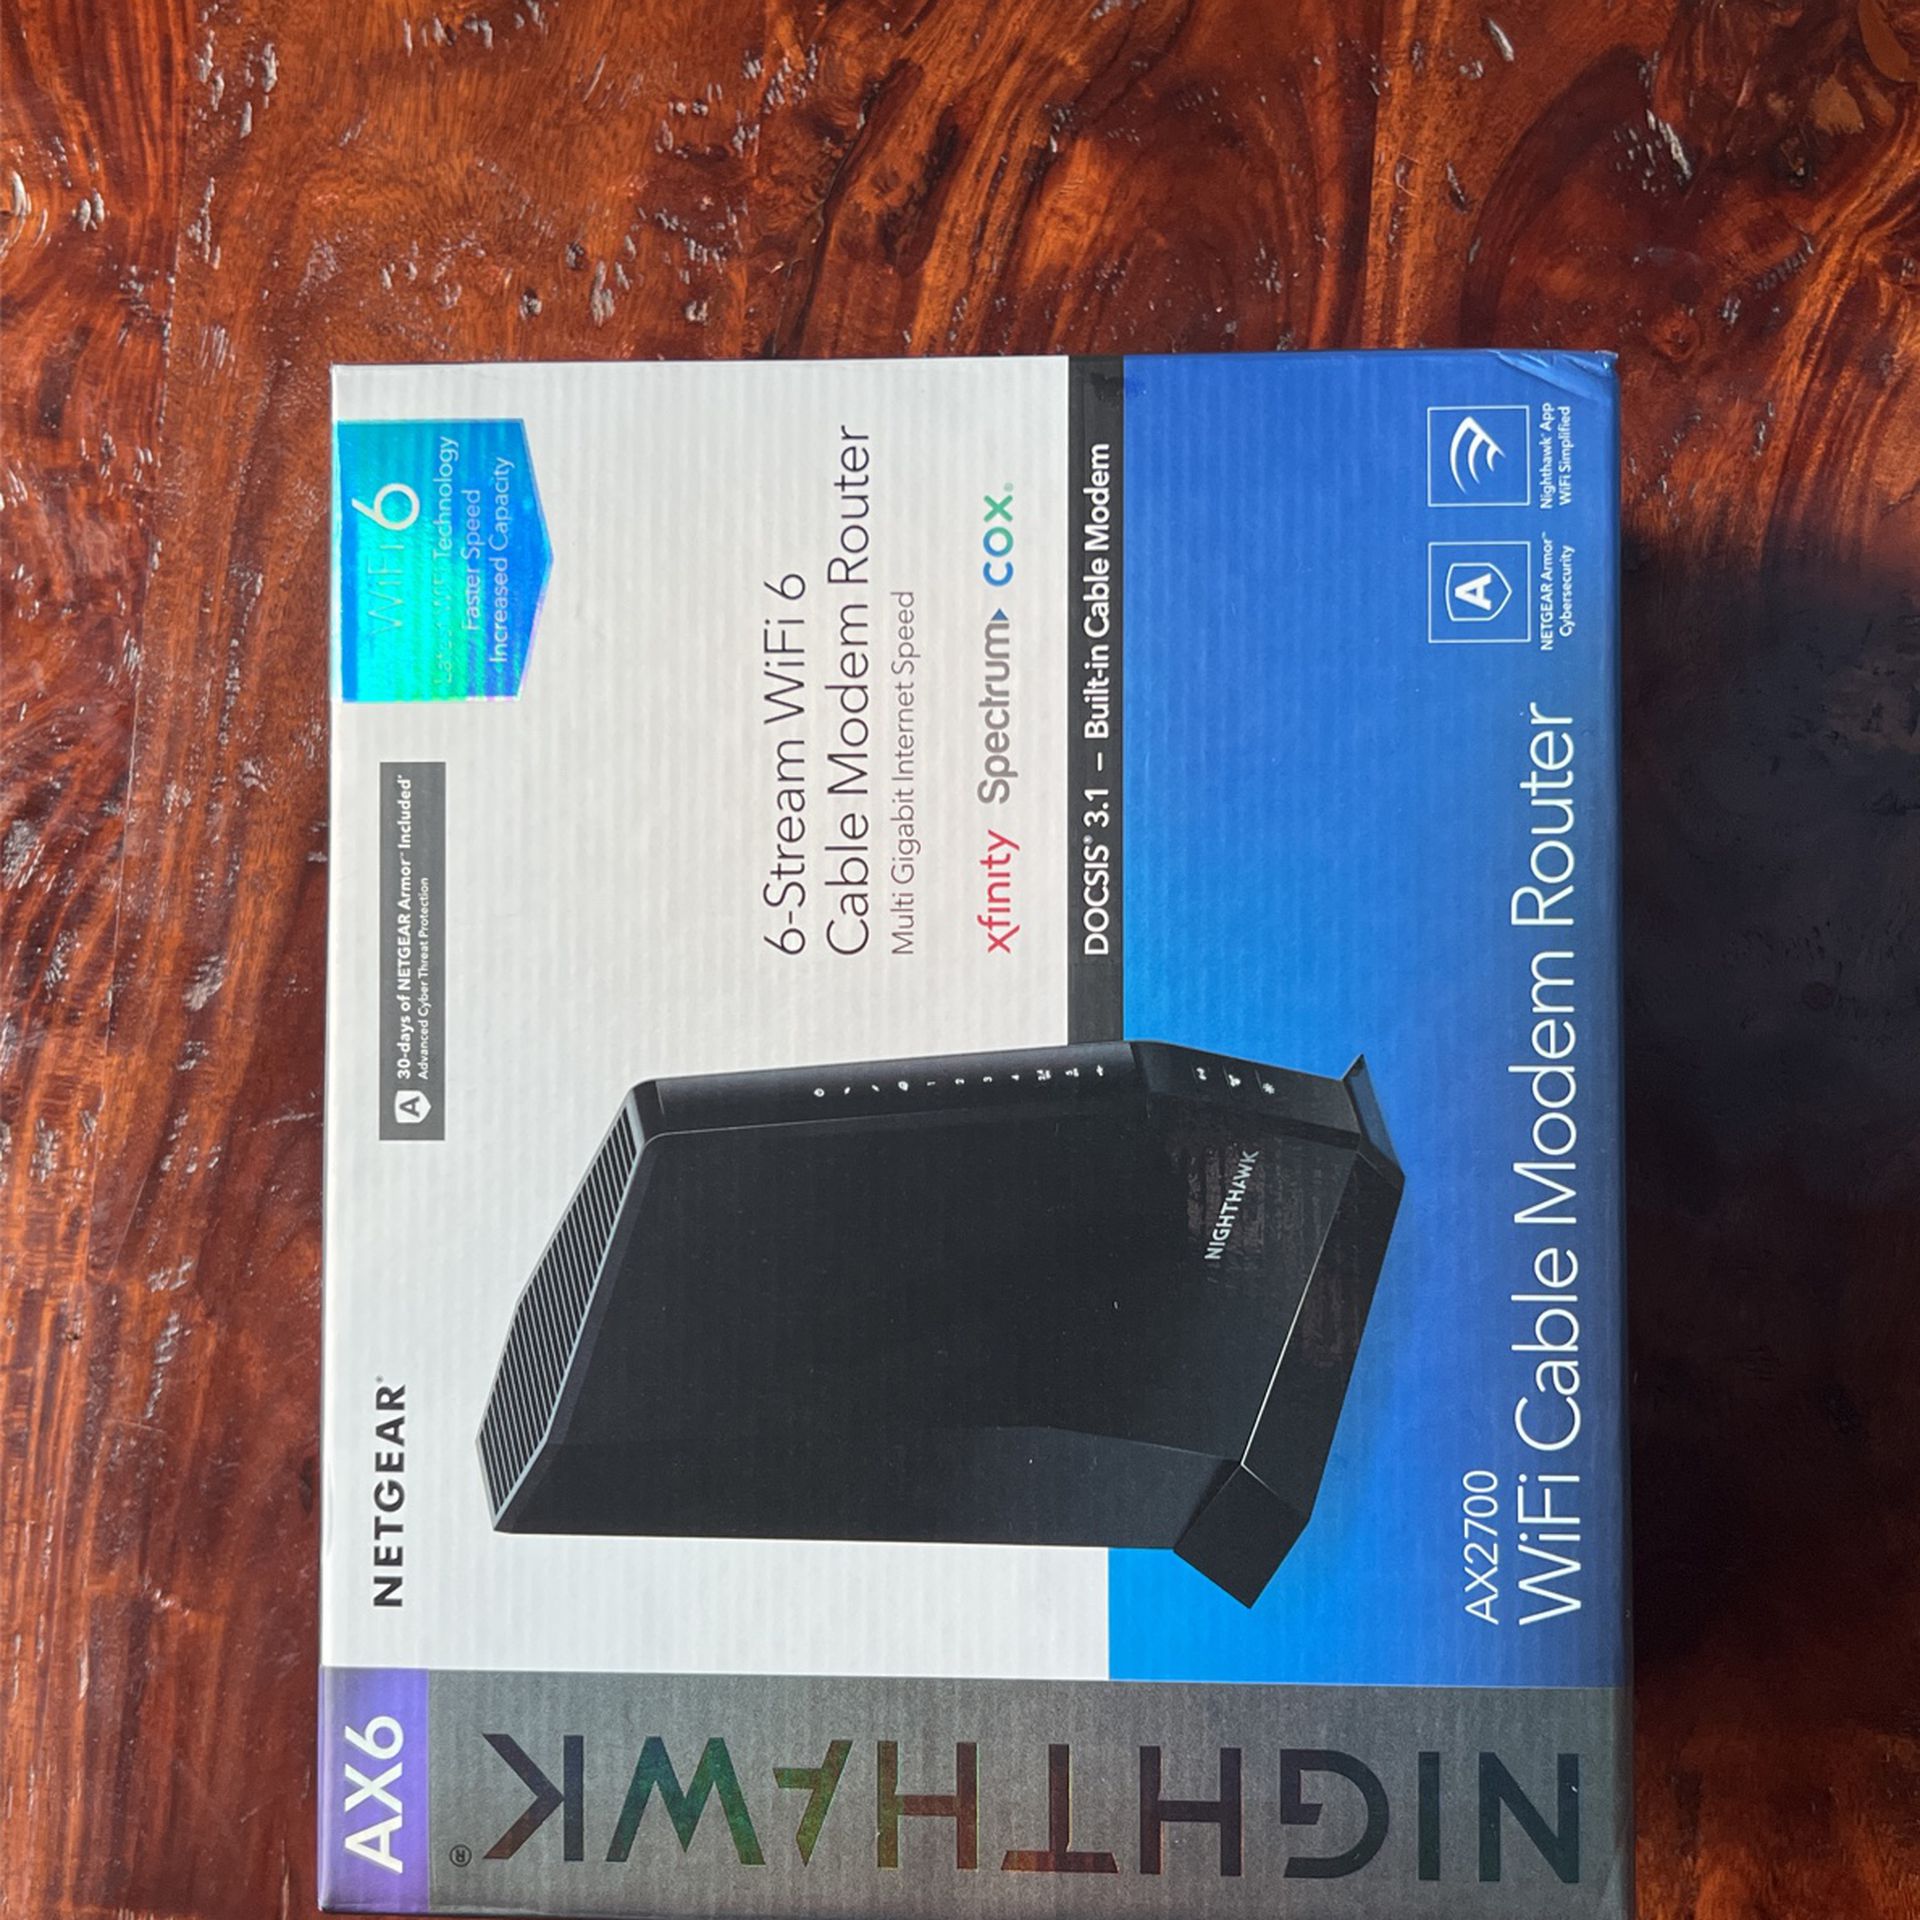 Netgear AX6/AX2700 Wi-Fi Cable Modem Router